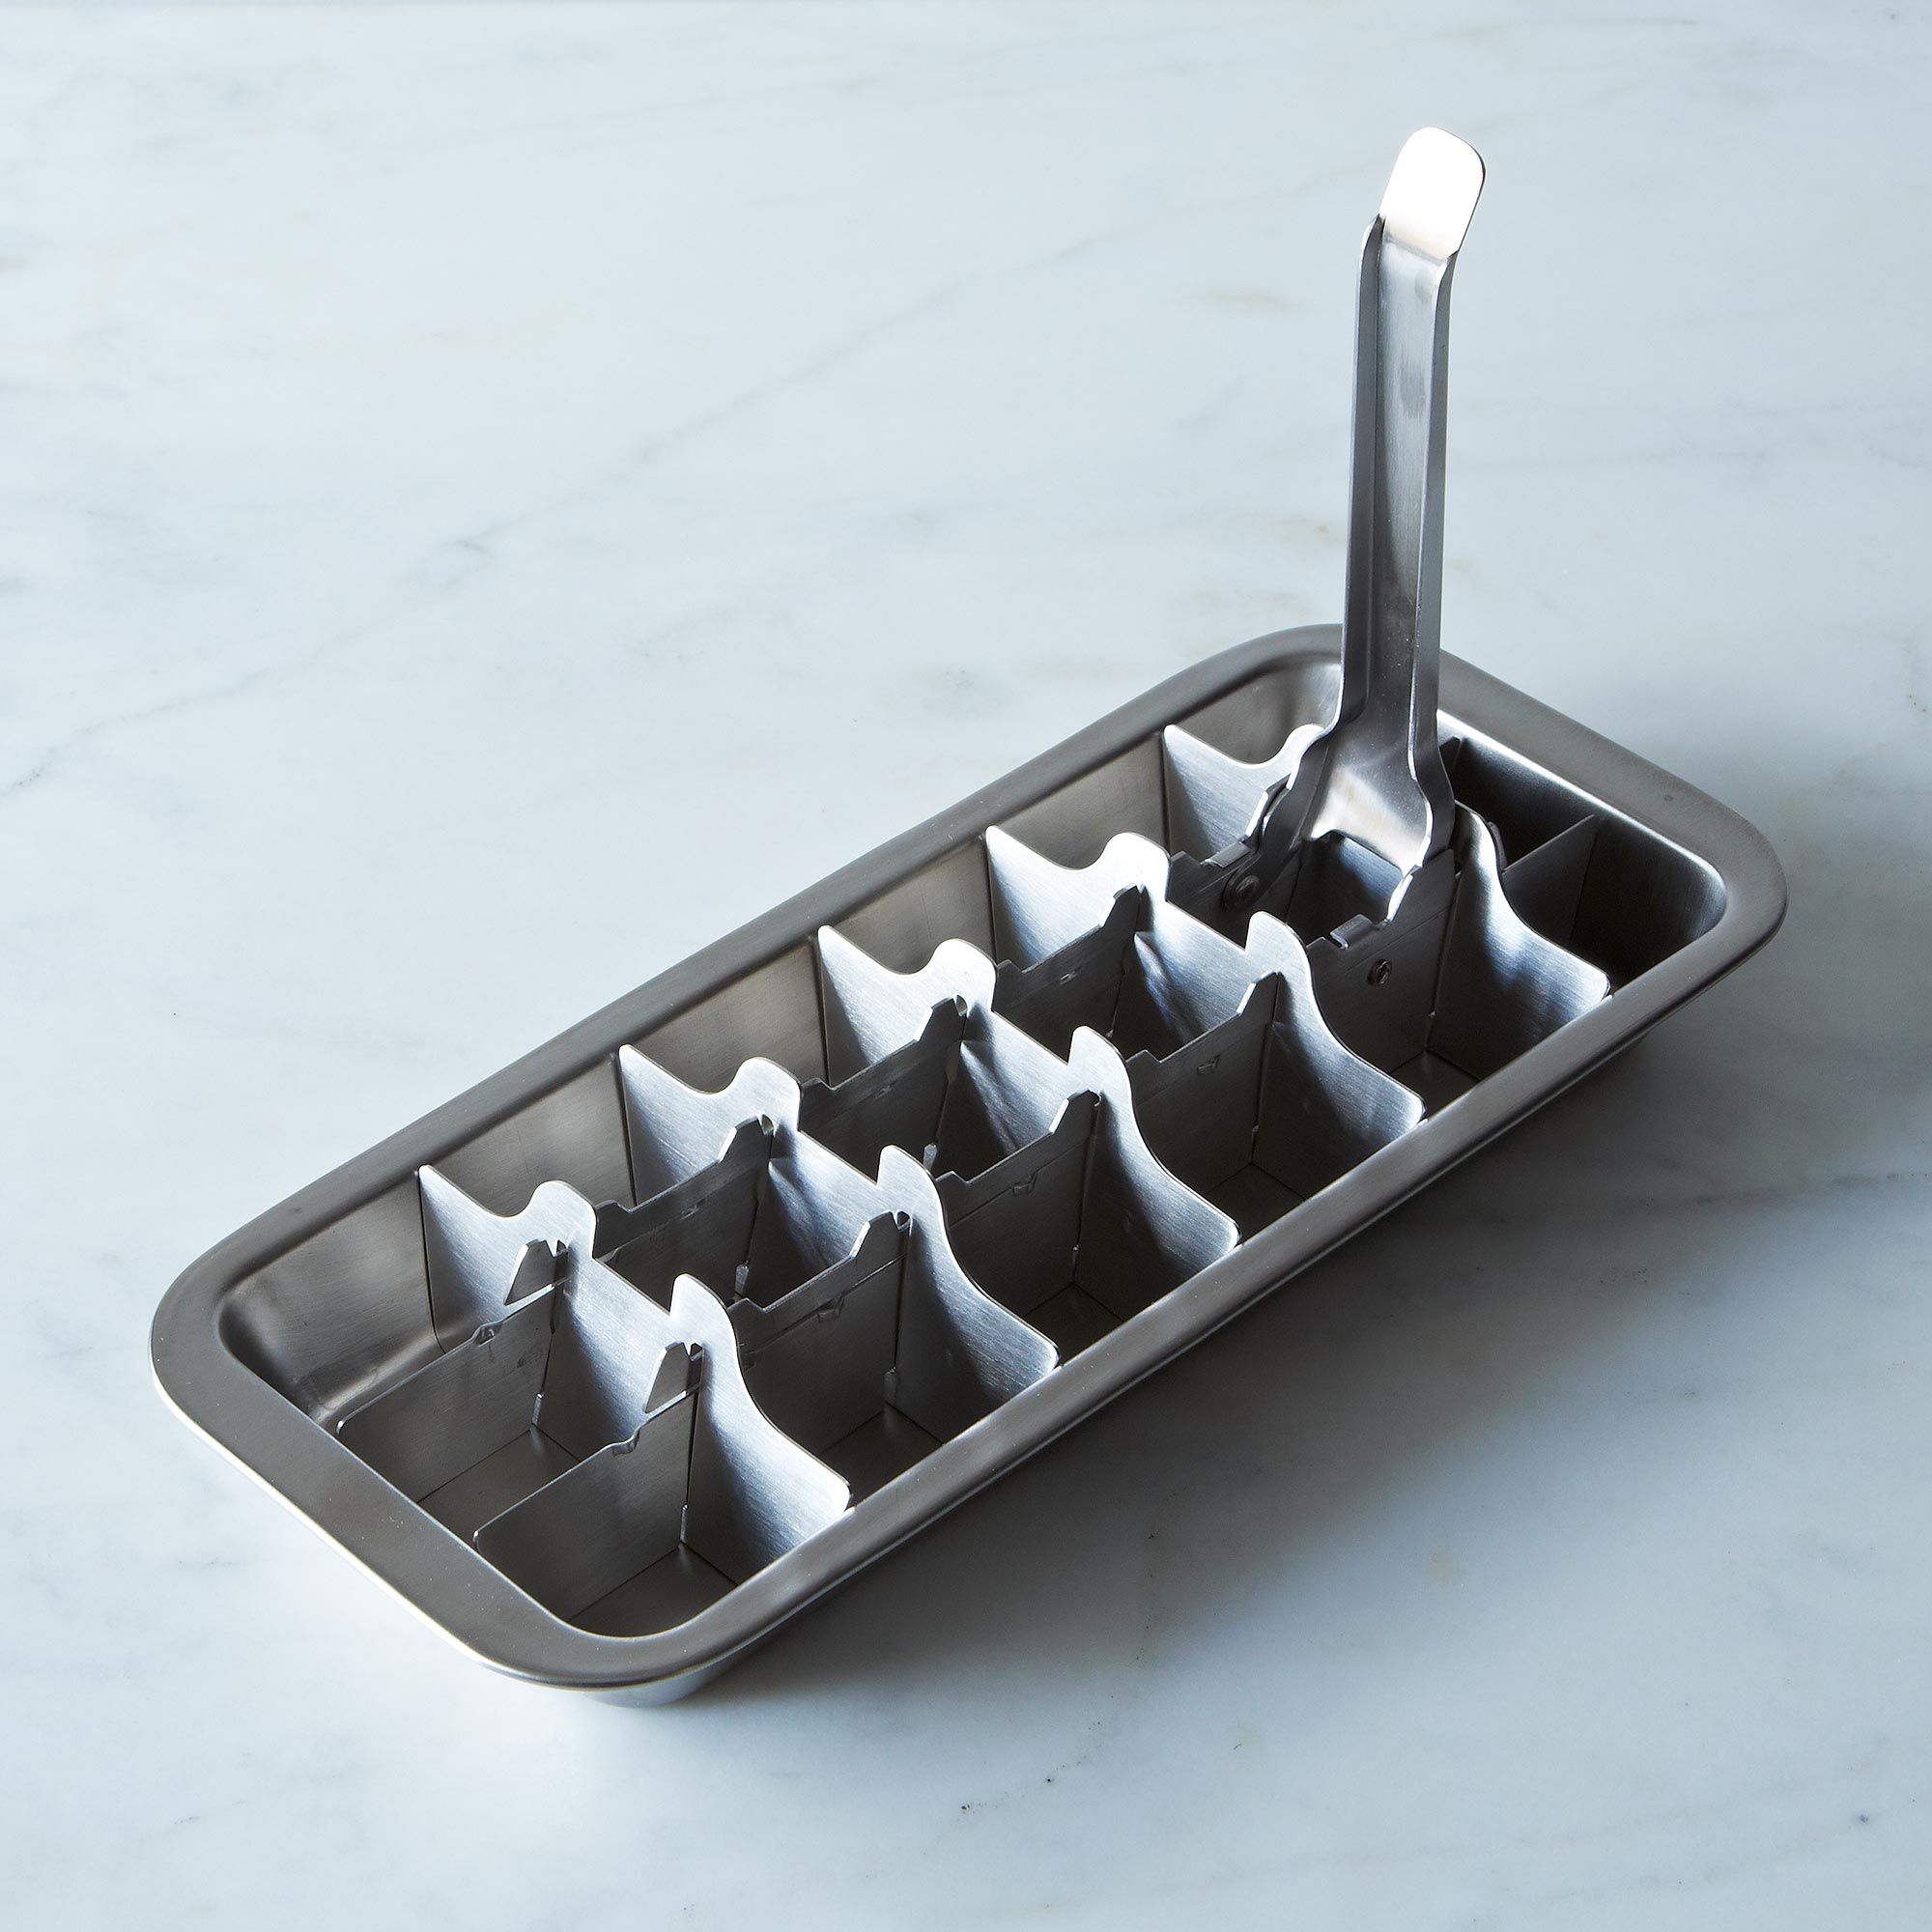 Onyx Stainless Steel Old-School Ice Cube Tray with Handle, Dishwasher Safe  on Food52